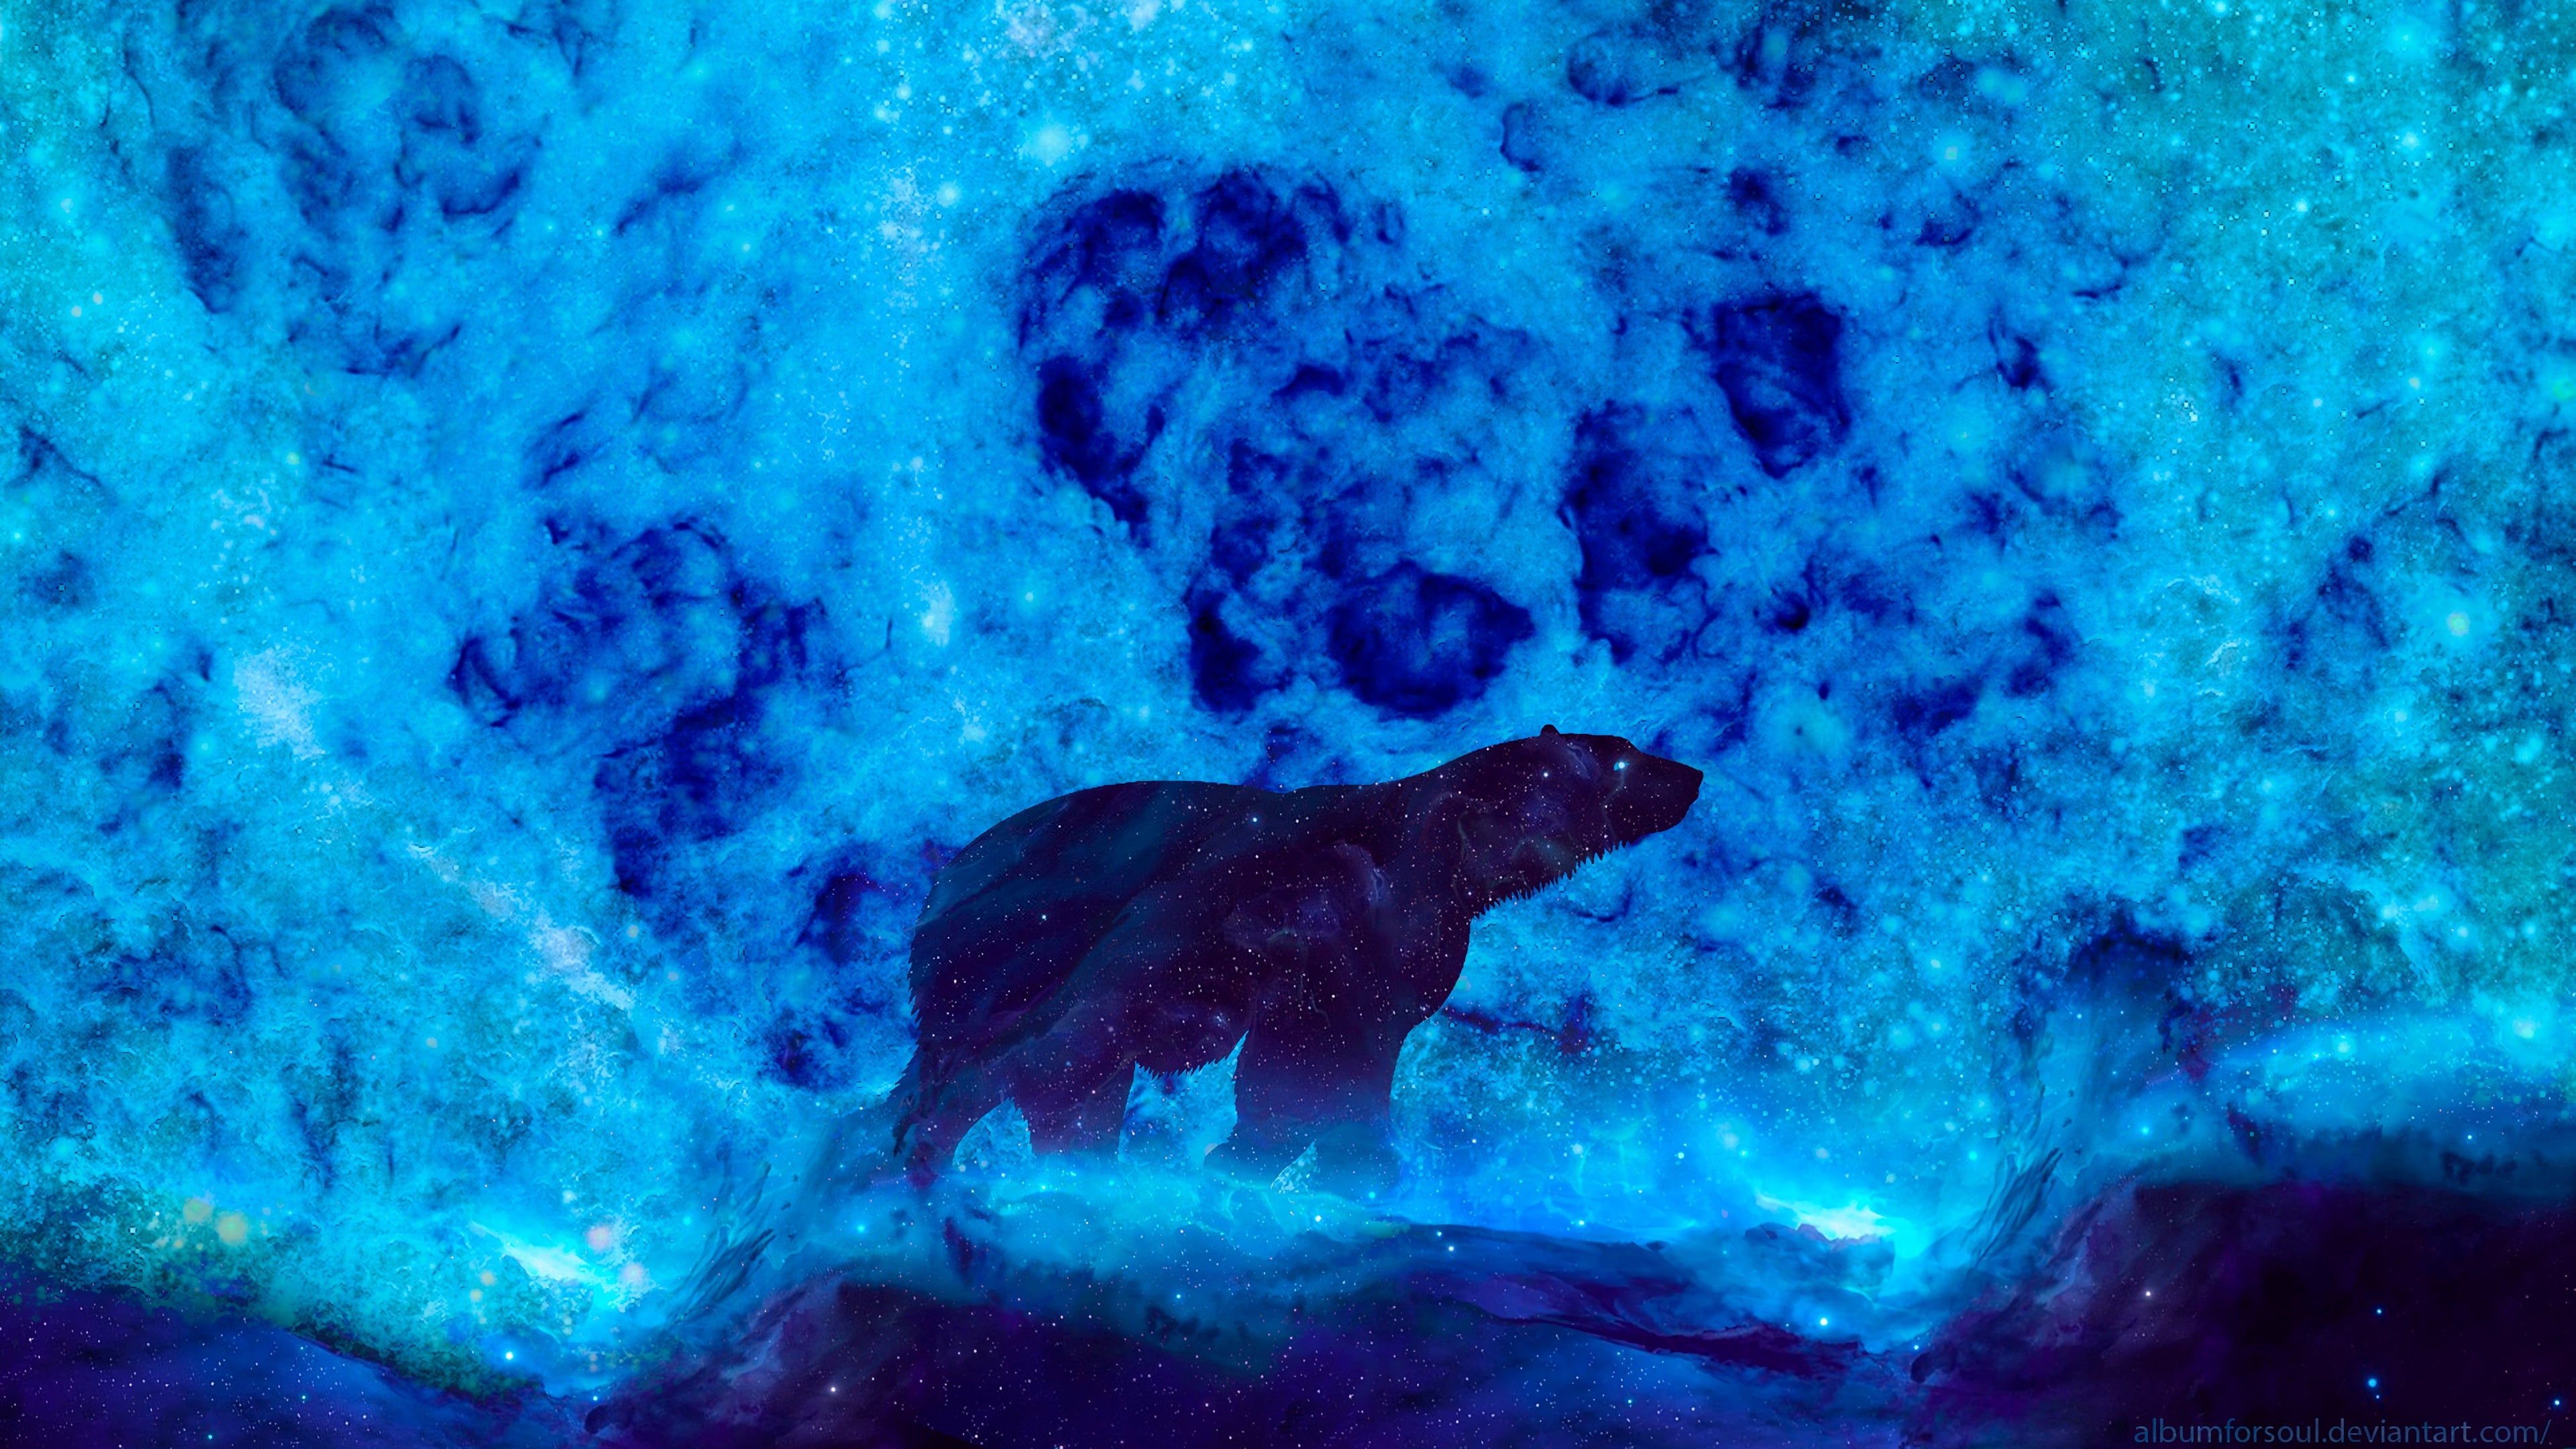 Bear 4K wallpaper for your desktop or mobile screen free and easy to download